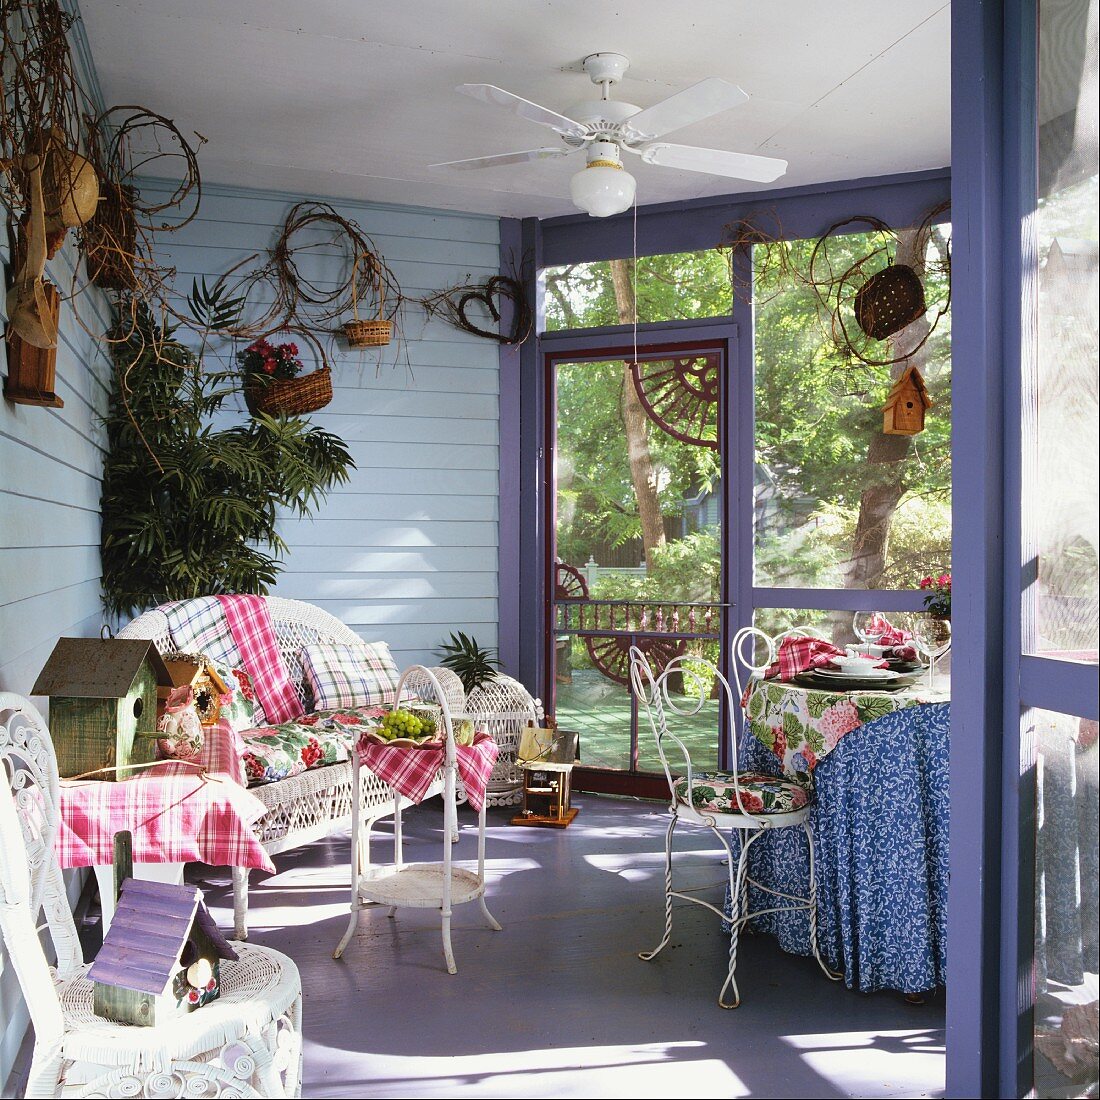 Glazed veranda with wicker furniture and ceiling fan; patterned textiles create a cheerful atmosphere